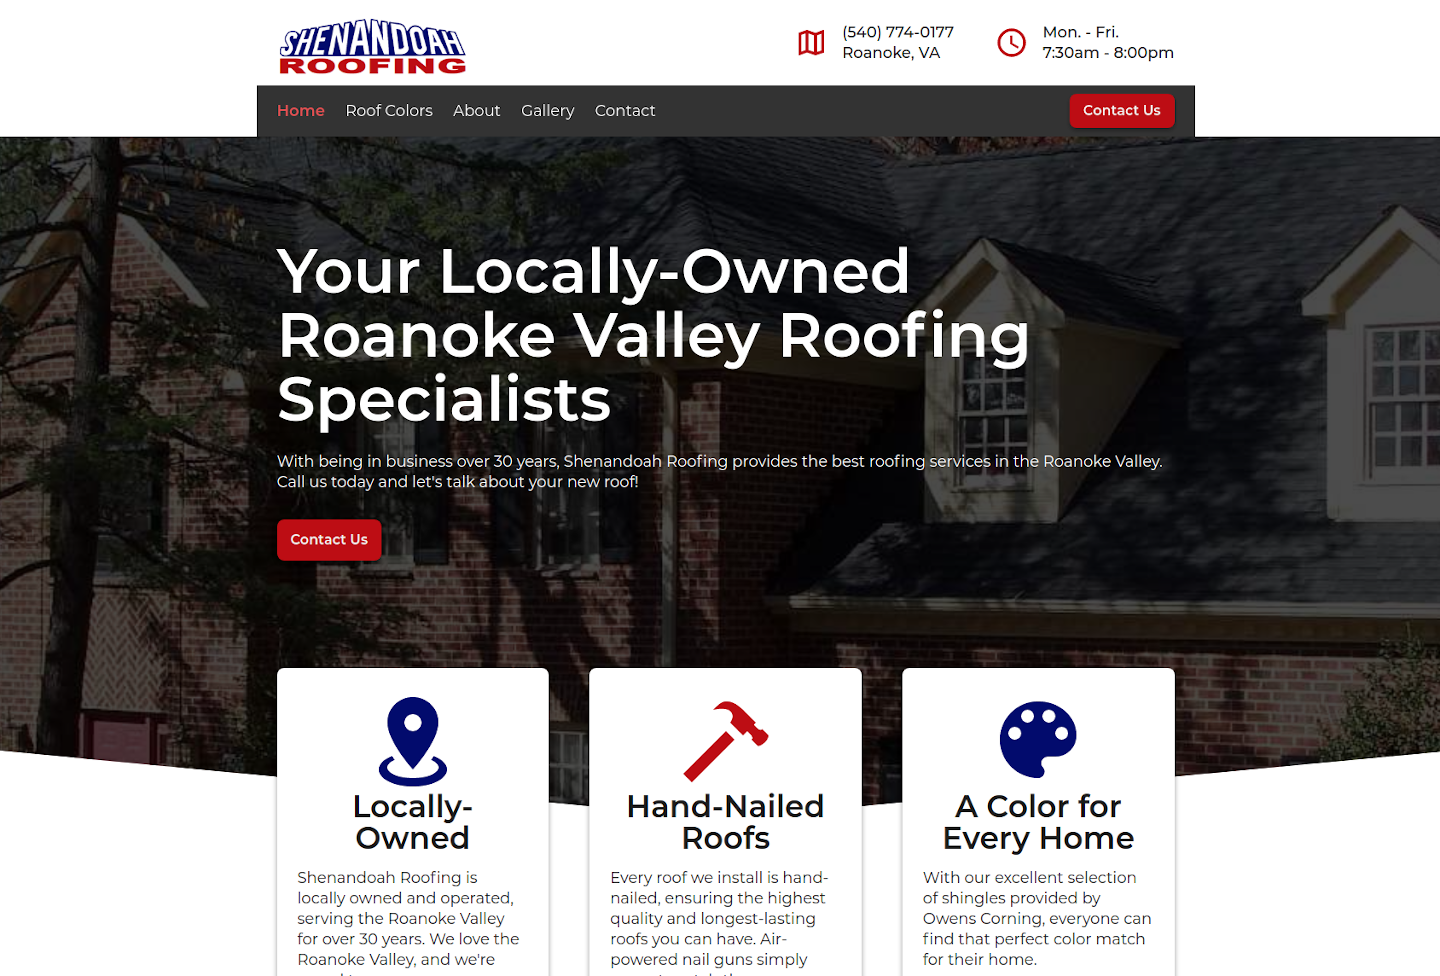 Homepage of Shenandoah Roofing